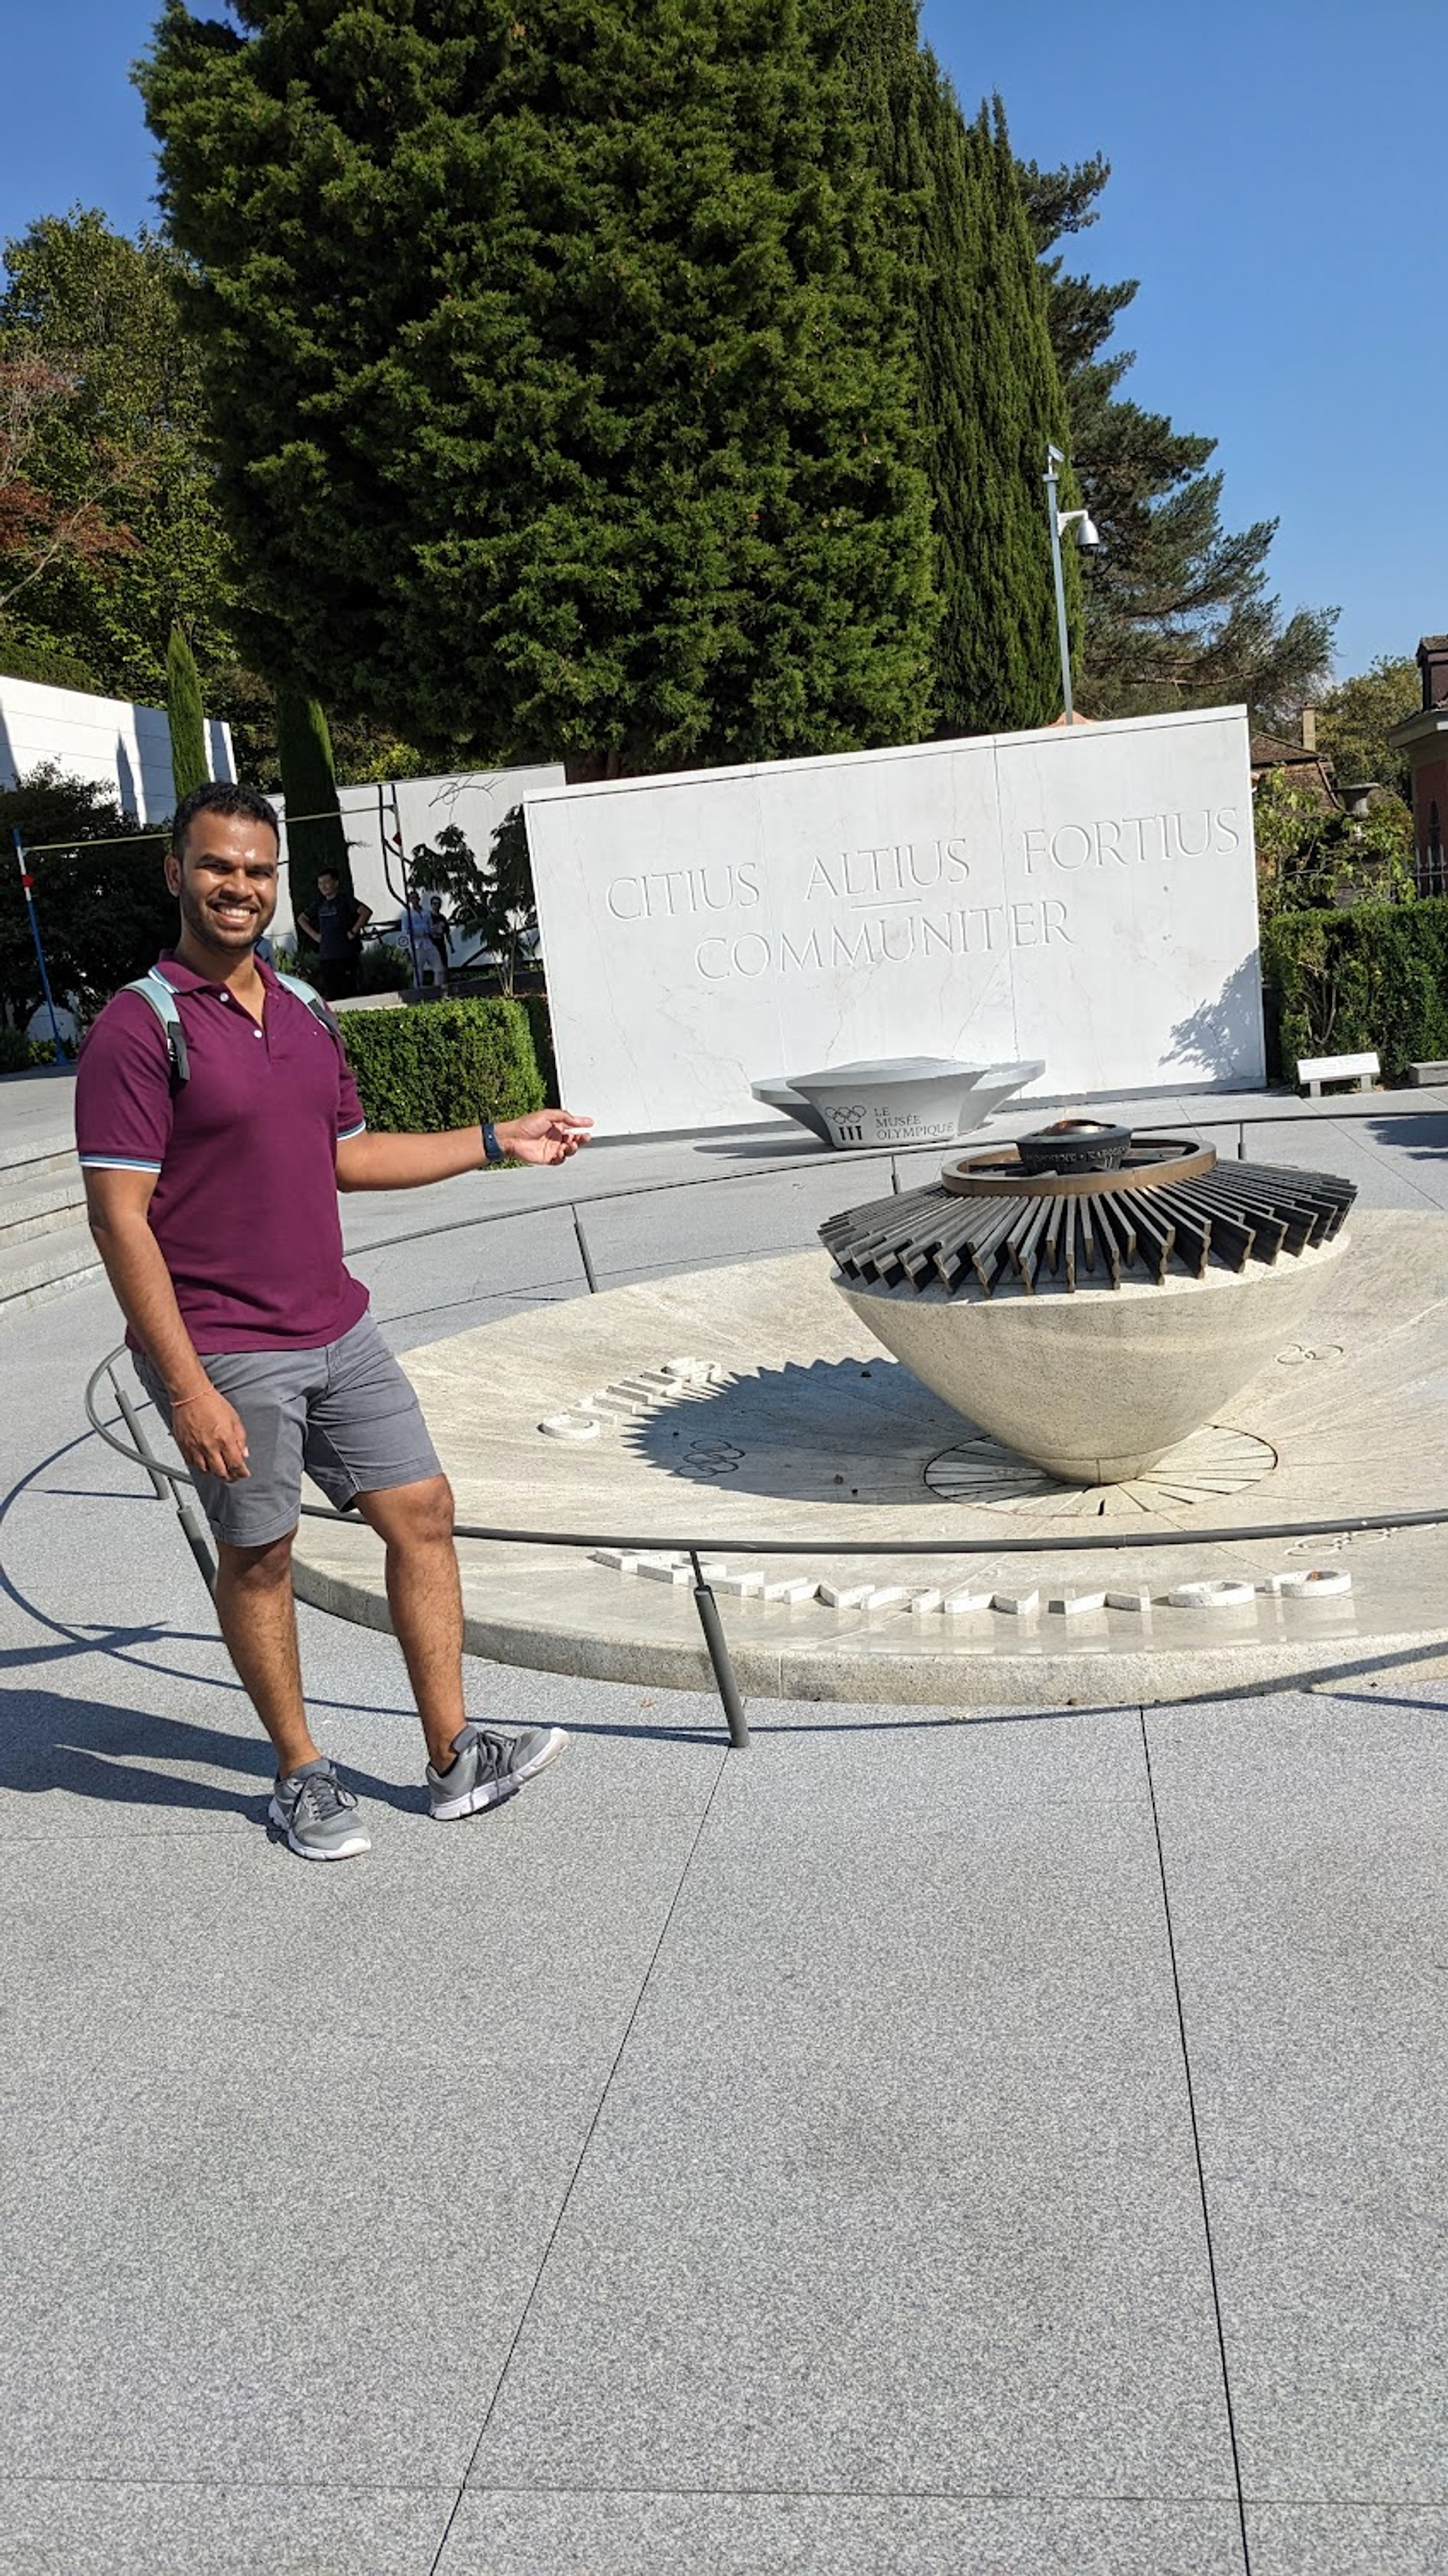 Me posing in front of the Olympic flame